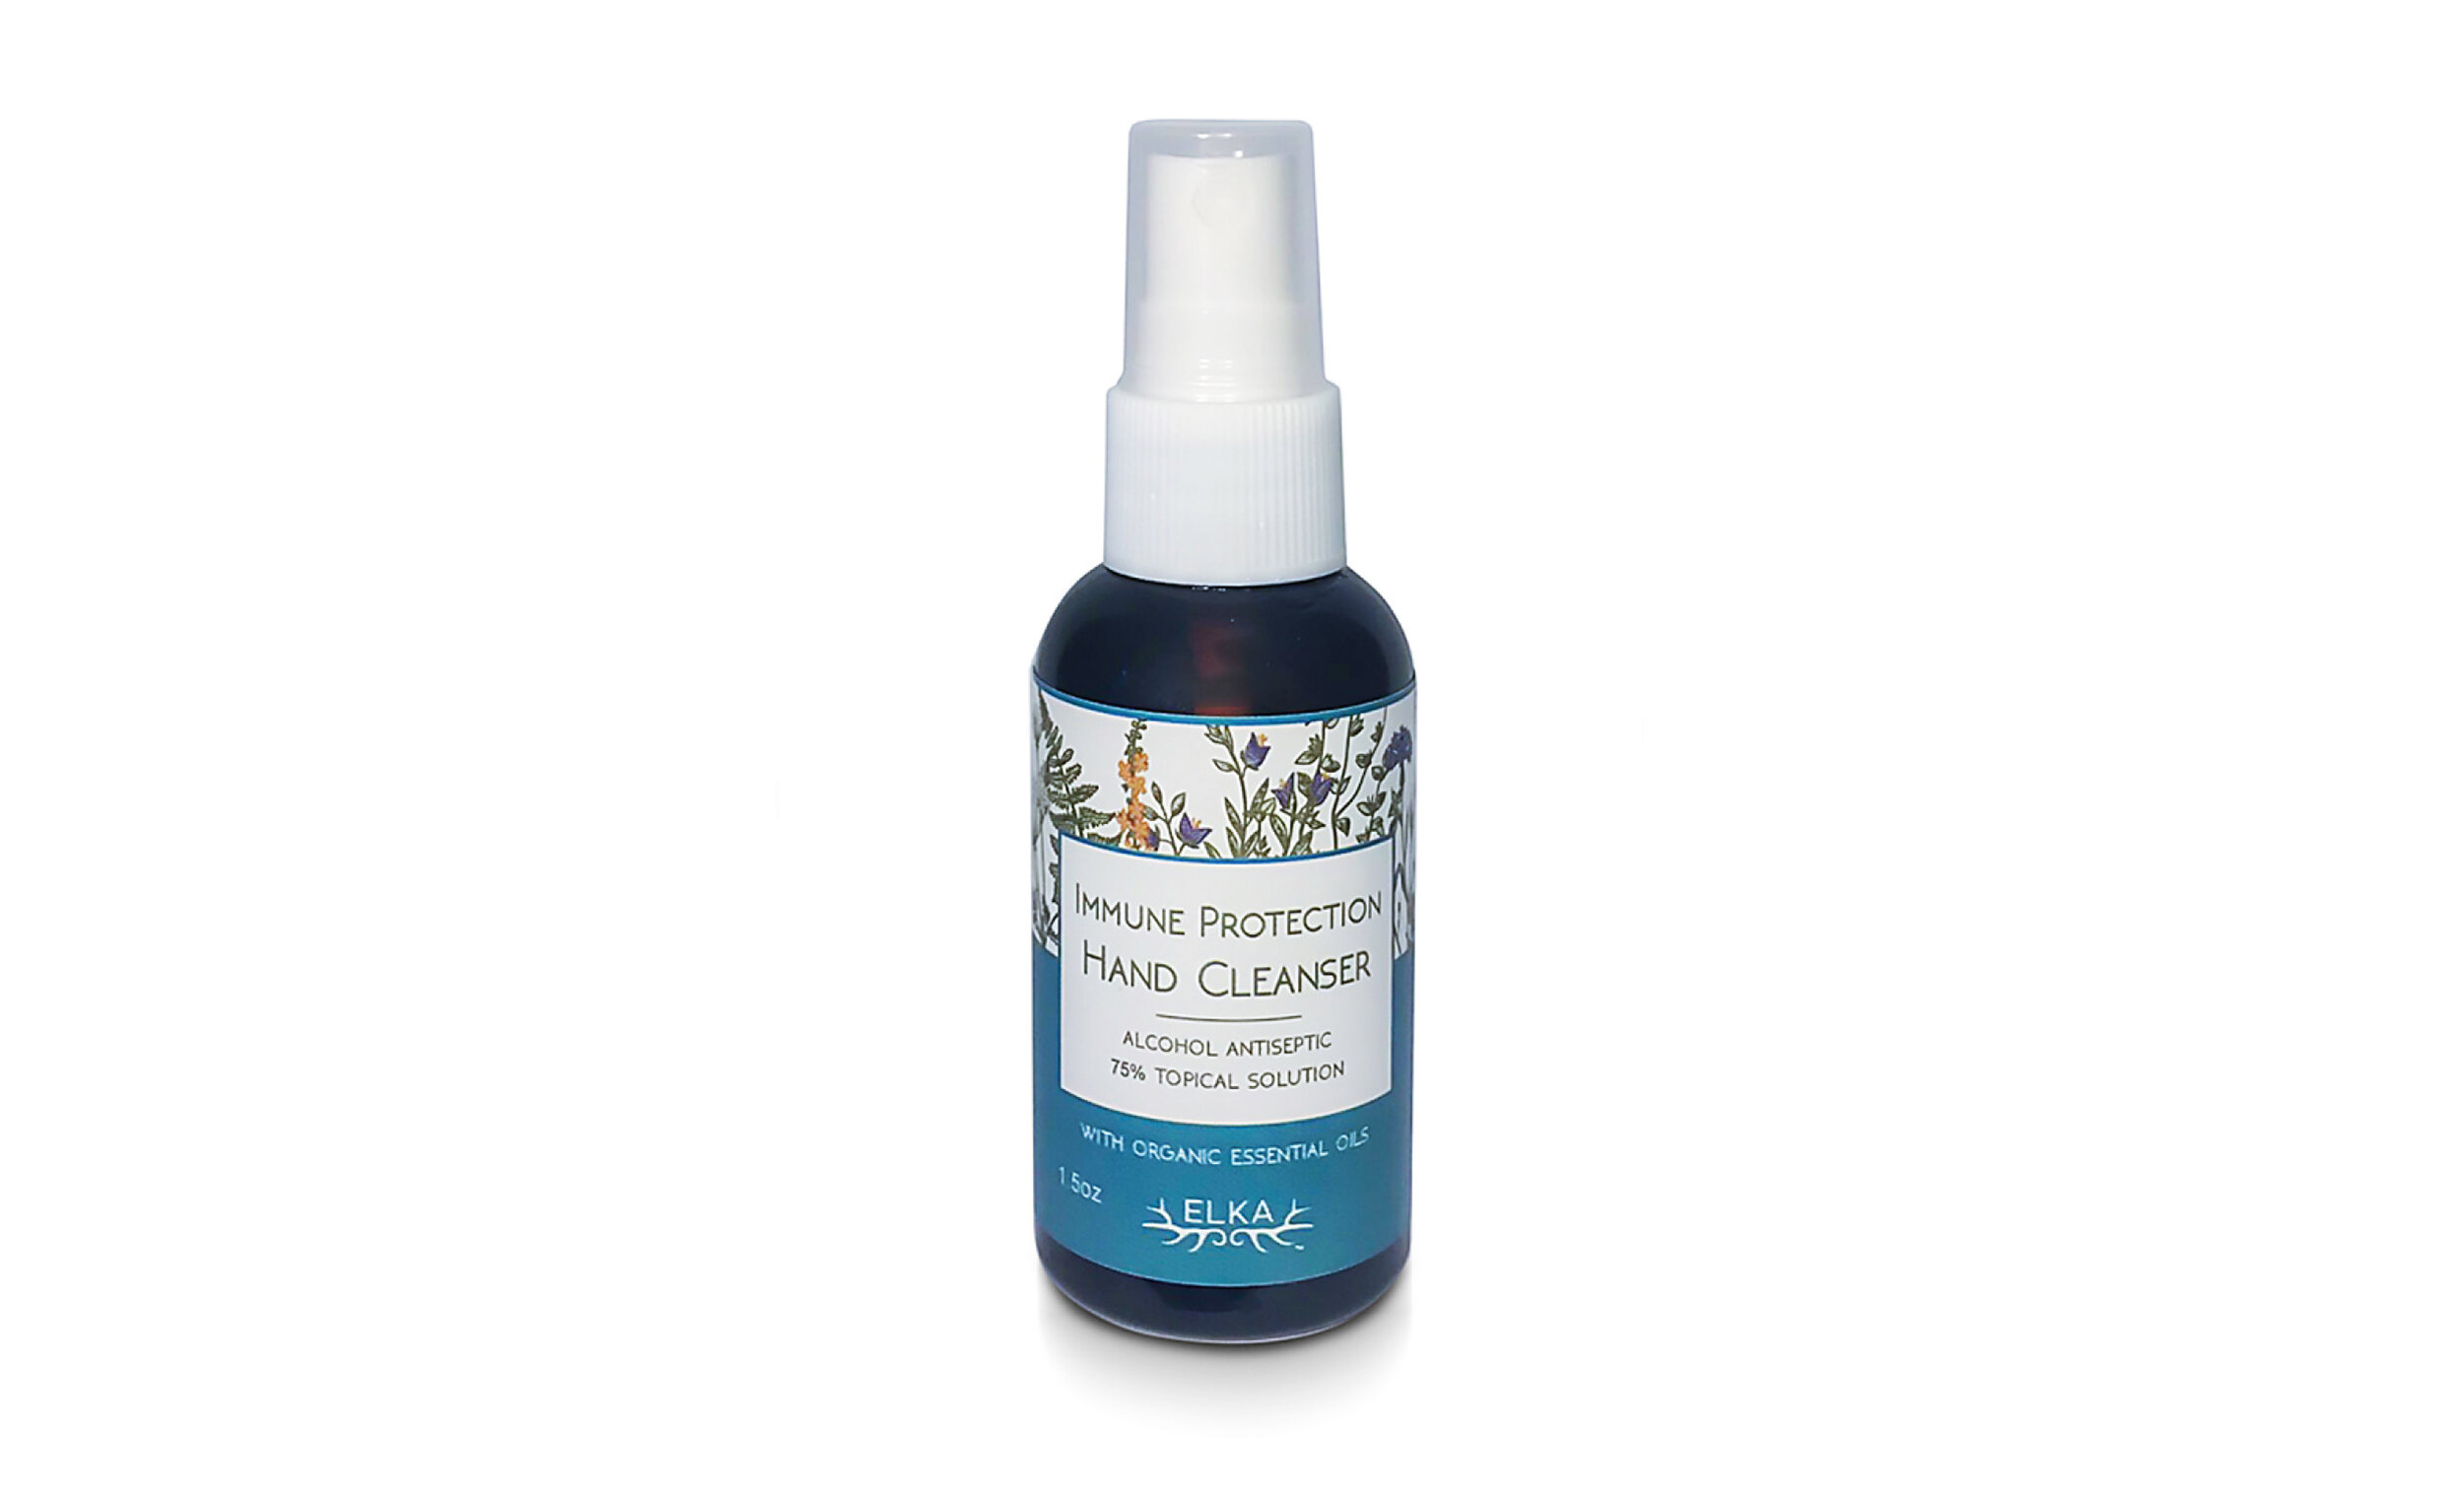 CLICK TO SHOP Immune Protection Hand Cleanser